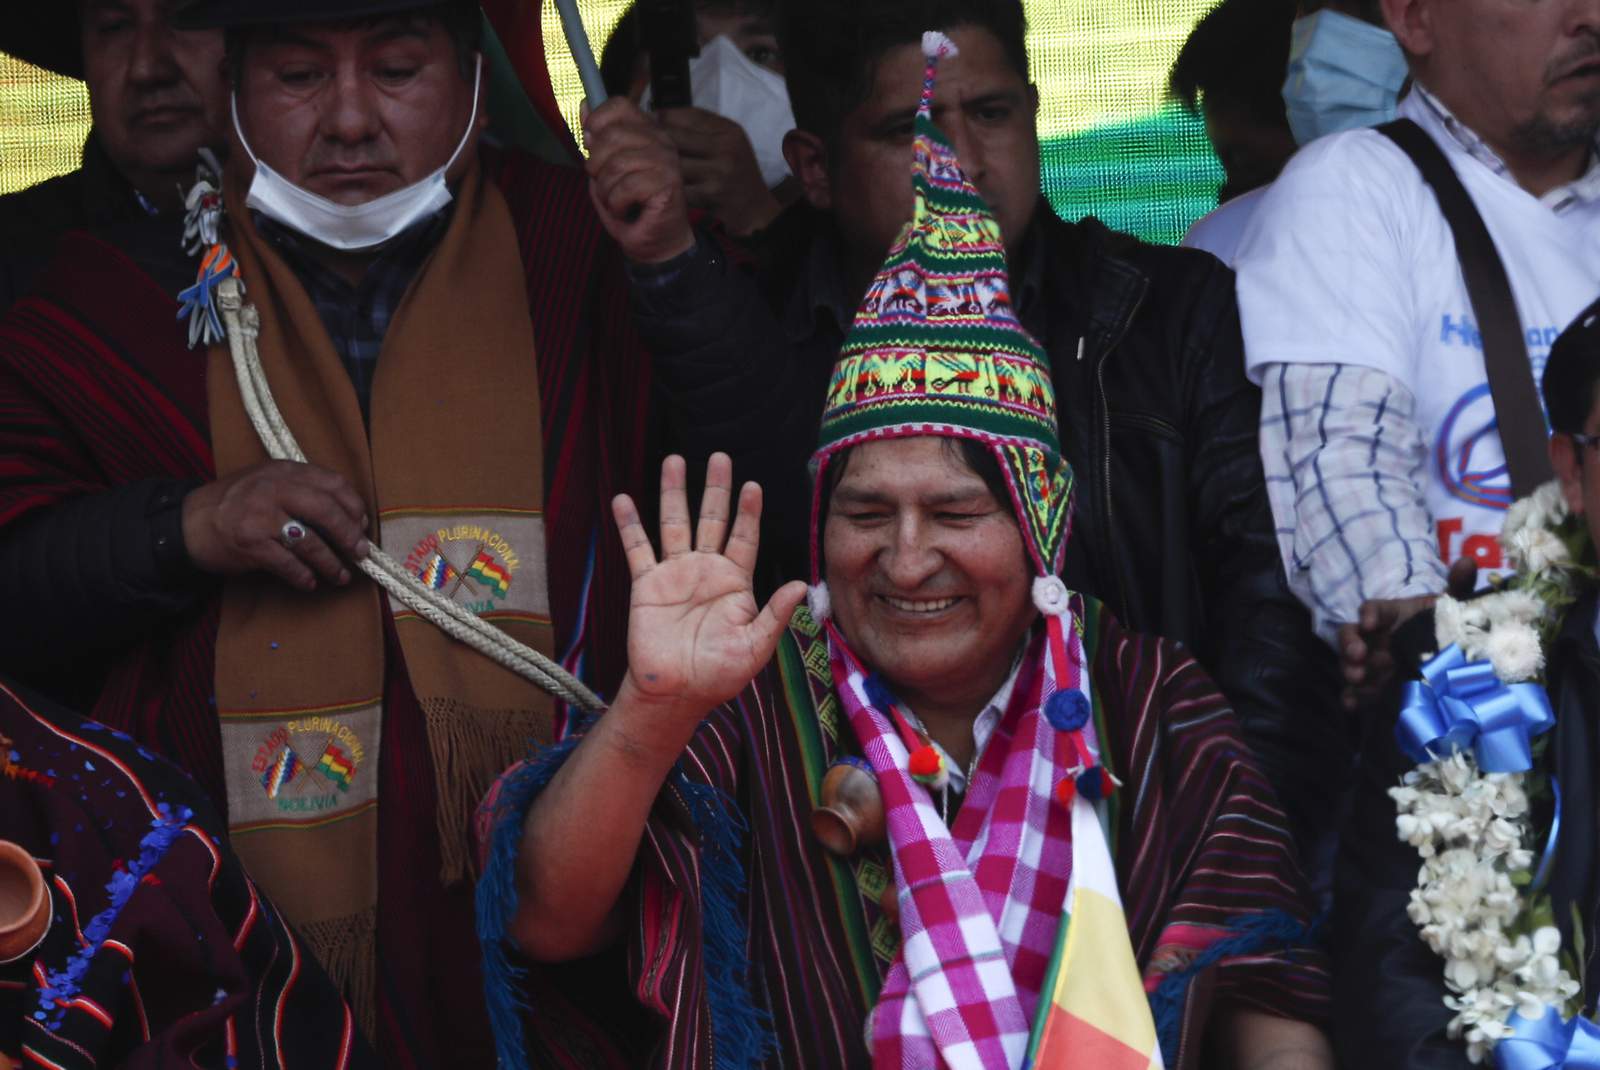 Evo Morales returns to Bolivia, ending year in exile